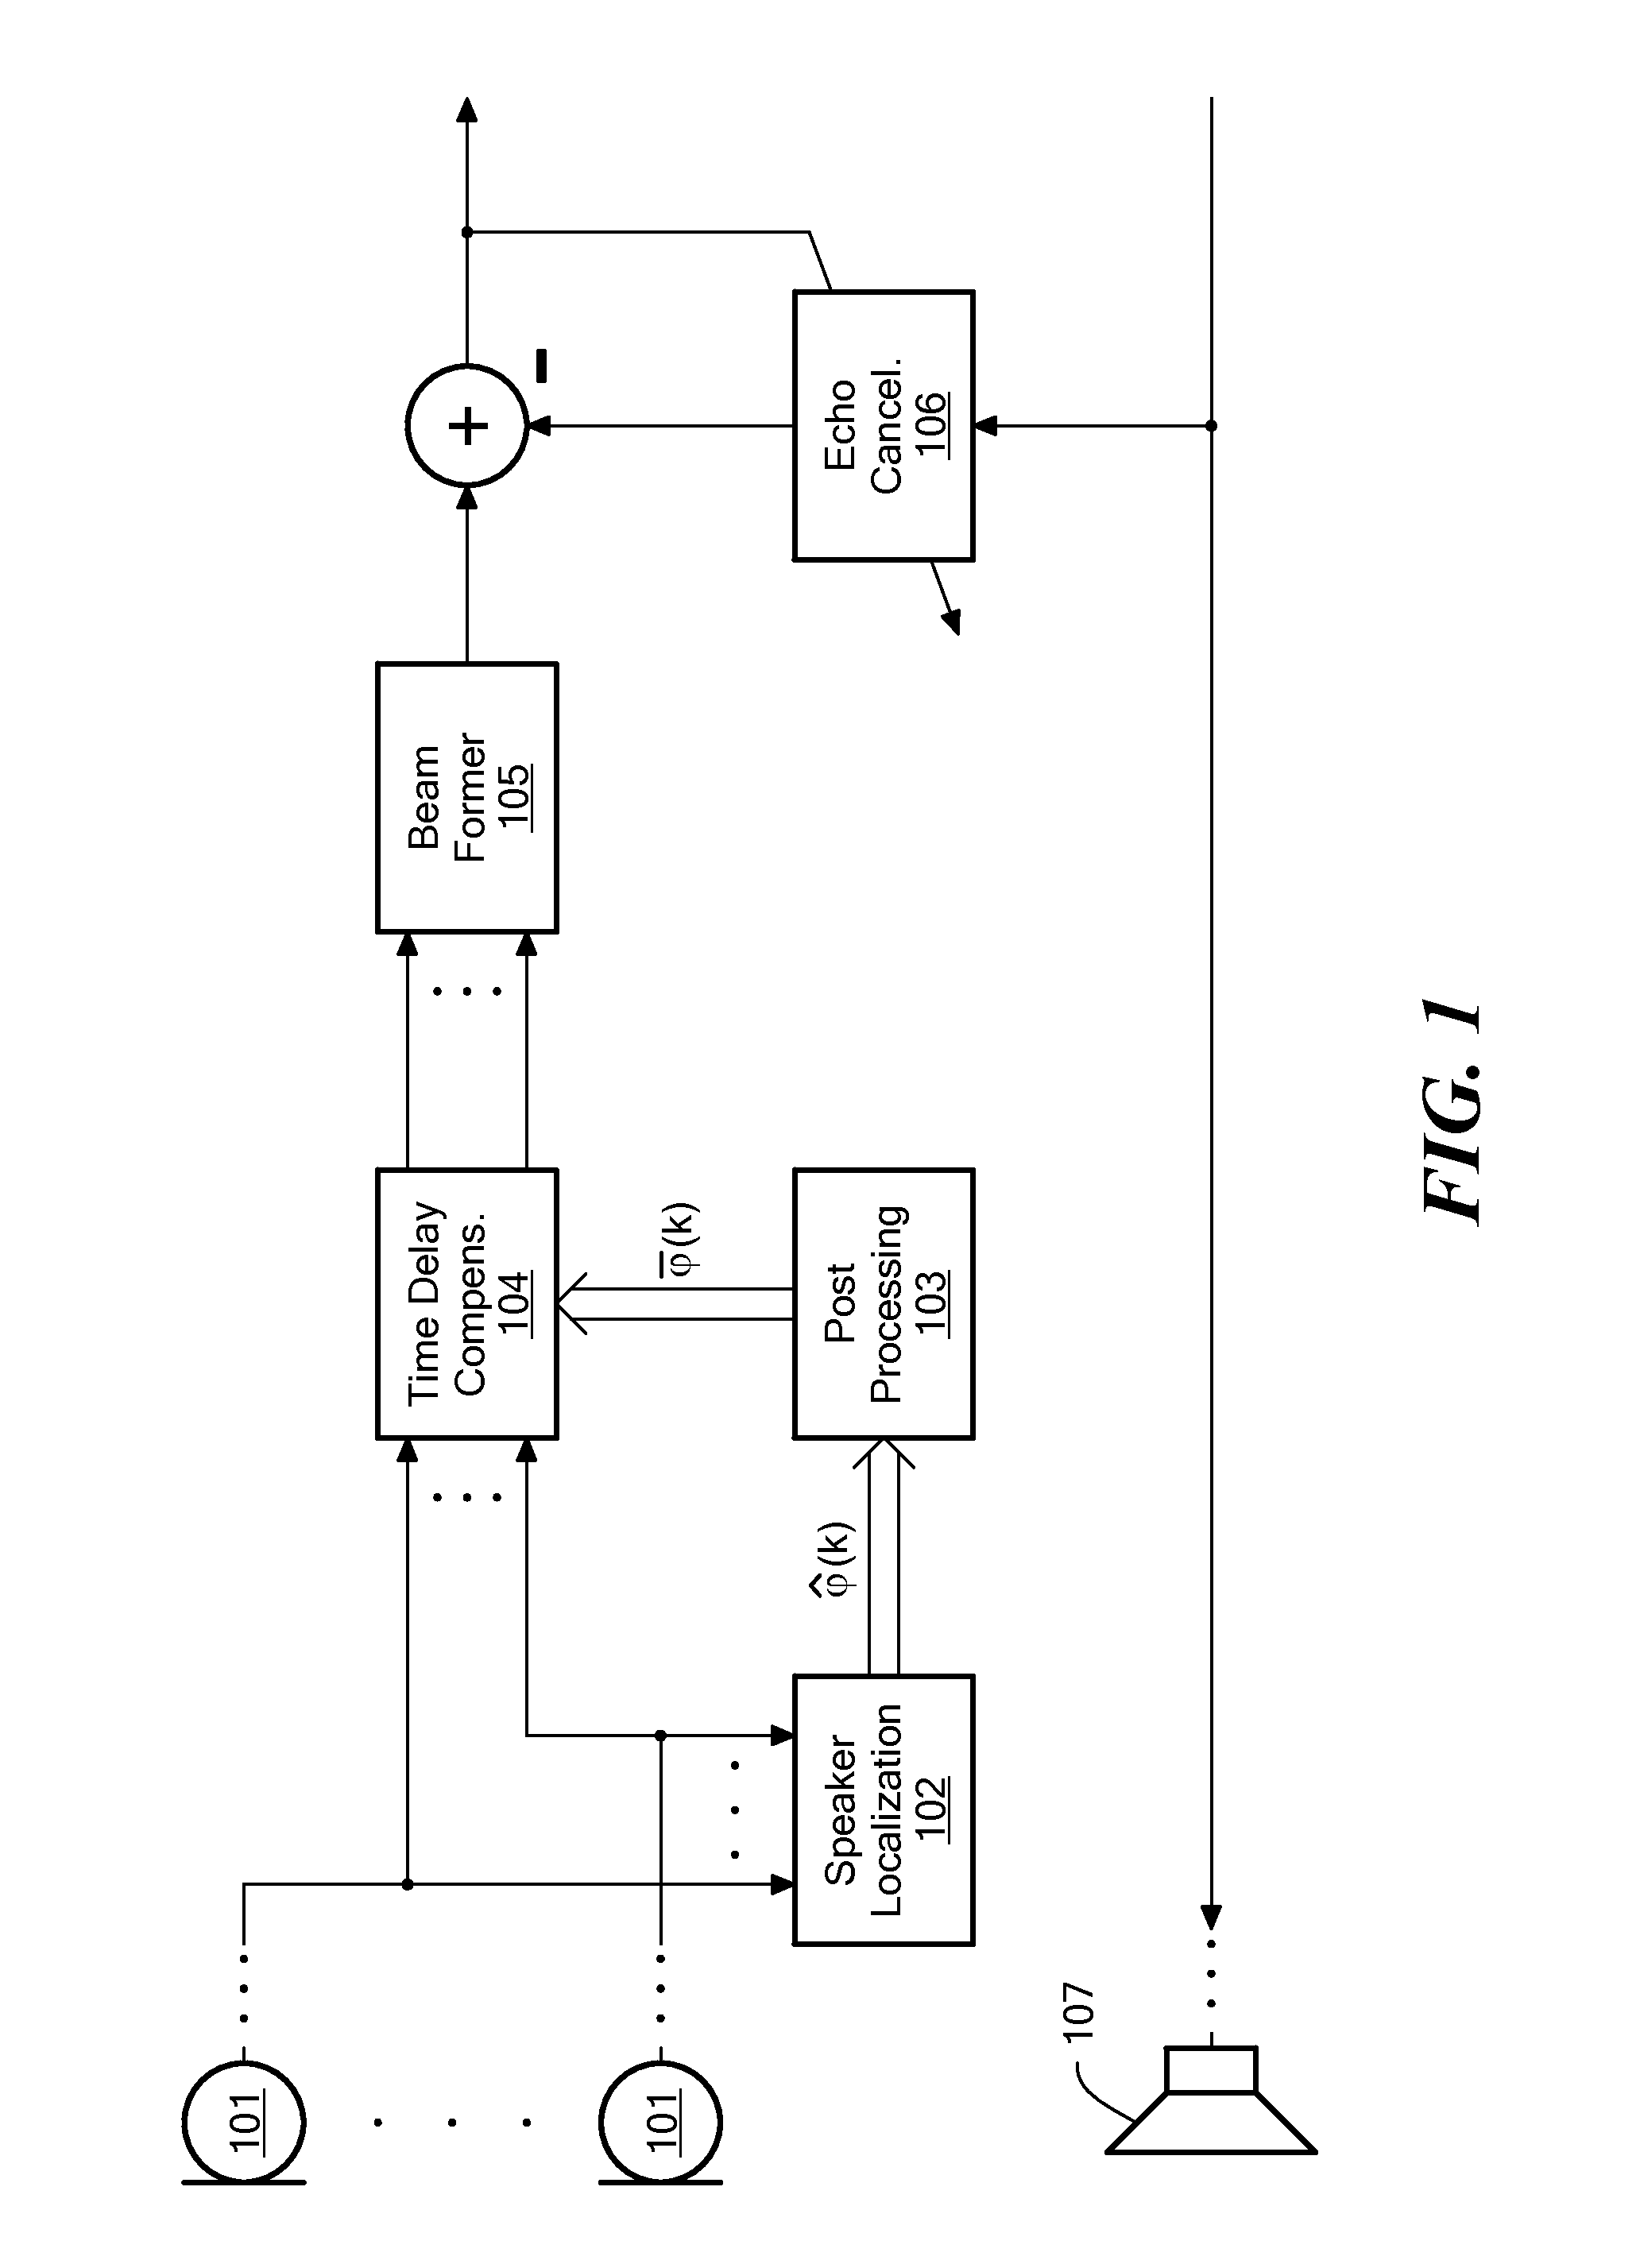 Method for Determining a Time Delay for Time Delay Compensation